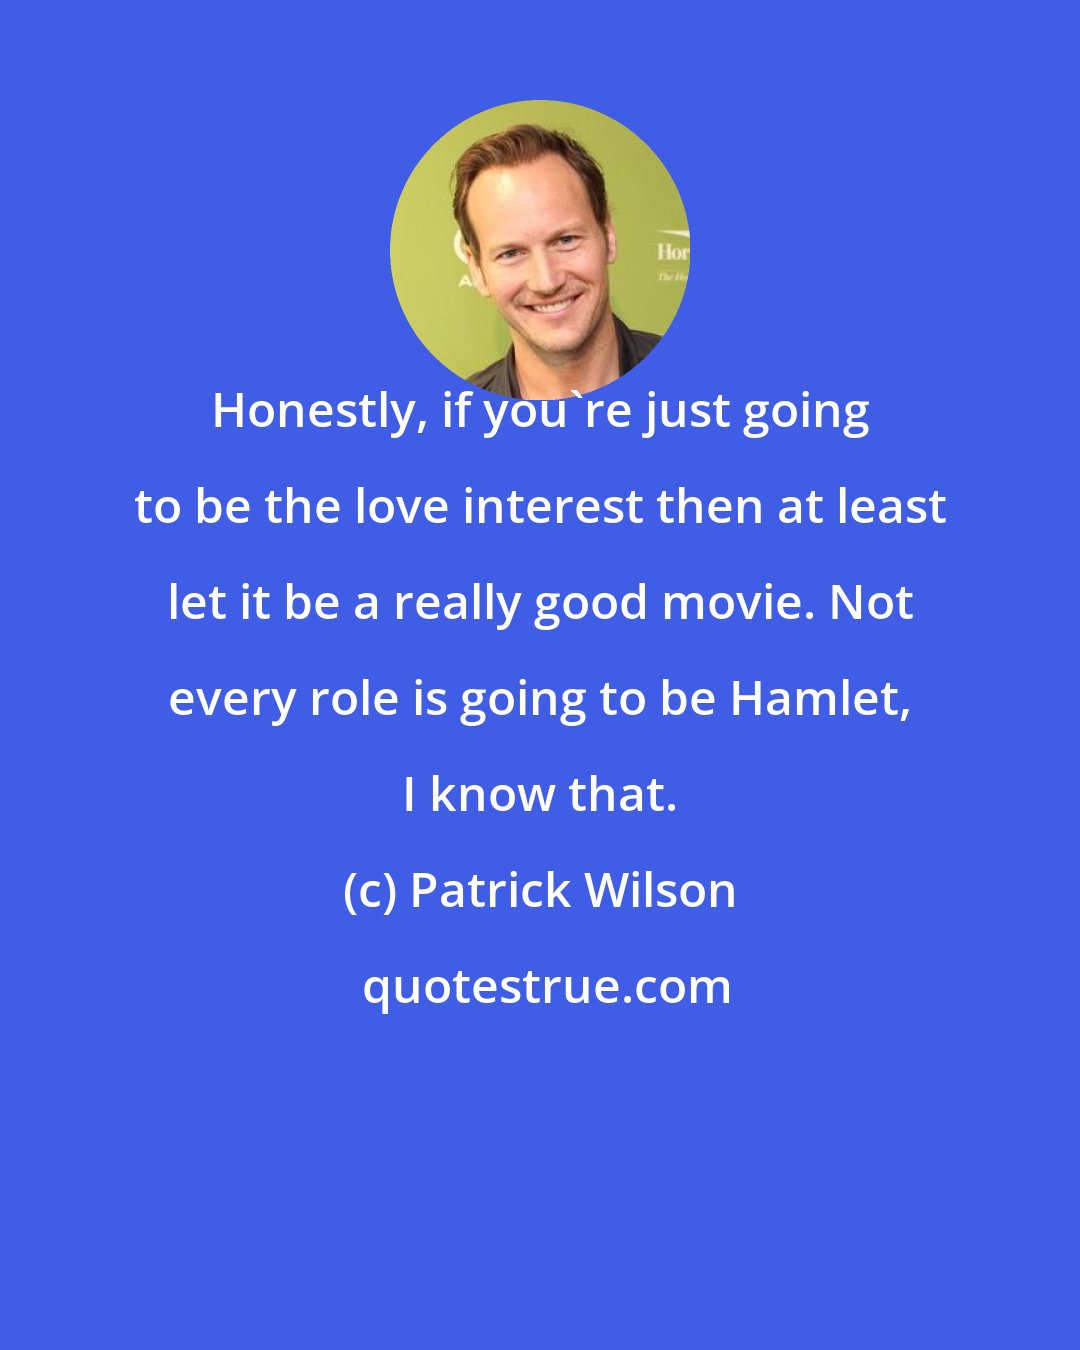 Patrick Wilson: Honestly, if you're just going to be the love interest then at least let it be a really good movie. Not every role is going to be Hamlet, I know that.